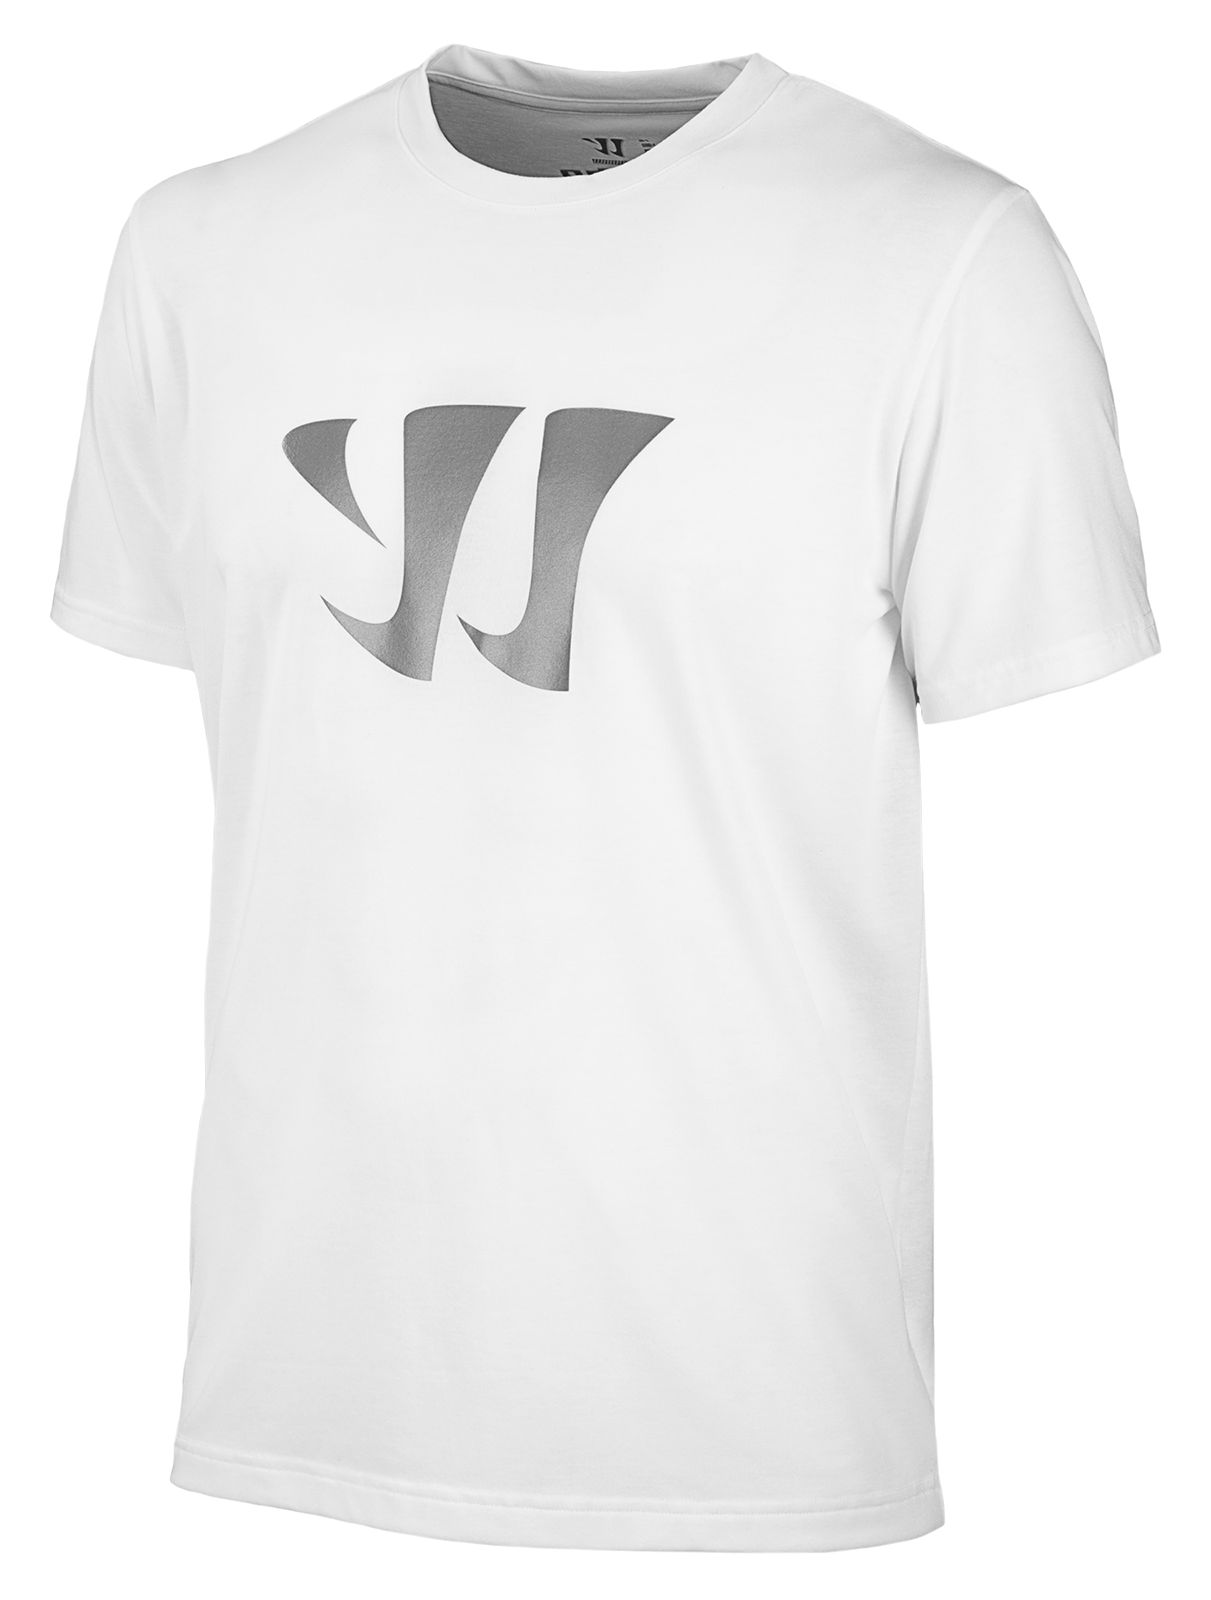 Reflective W Tech Tee, White image number 1